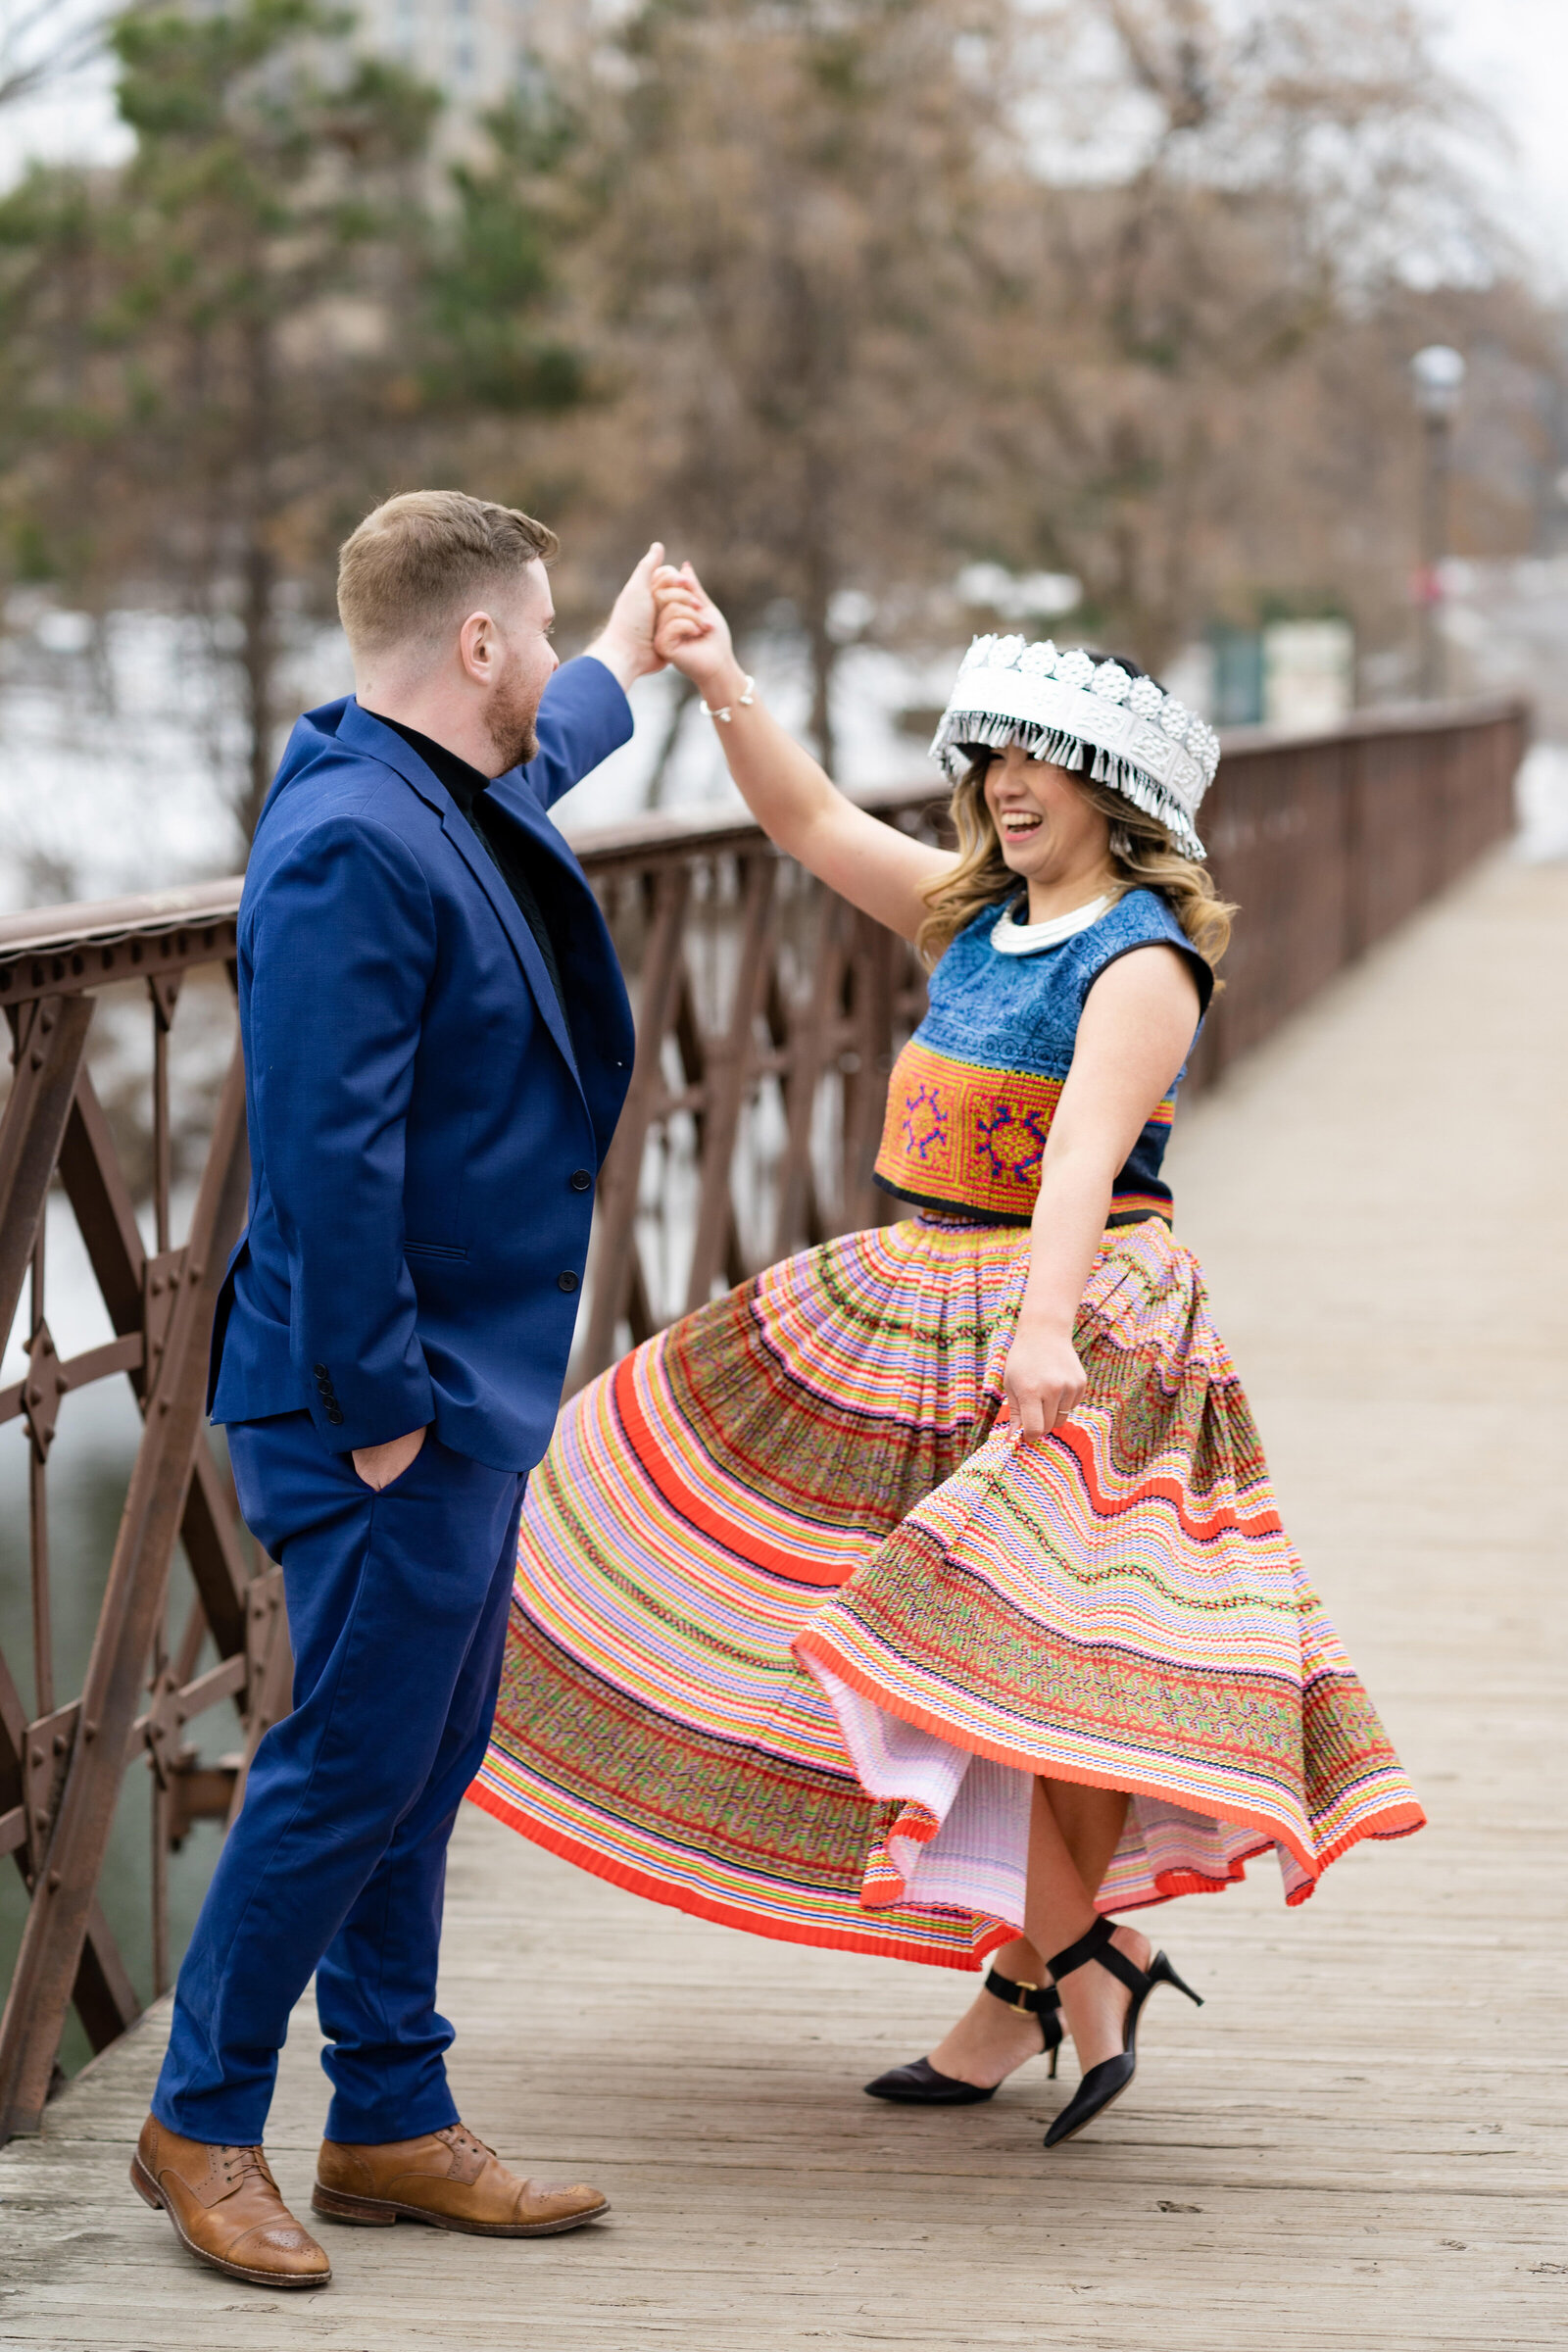 Hmong woman and man in blue suit dance on bridge in Minneapolis, Minnesota.